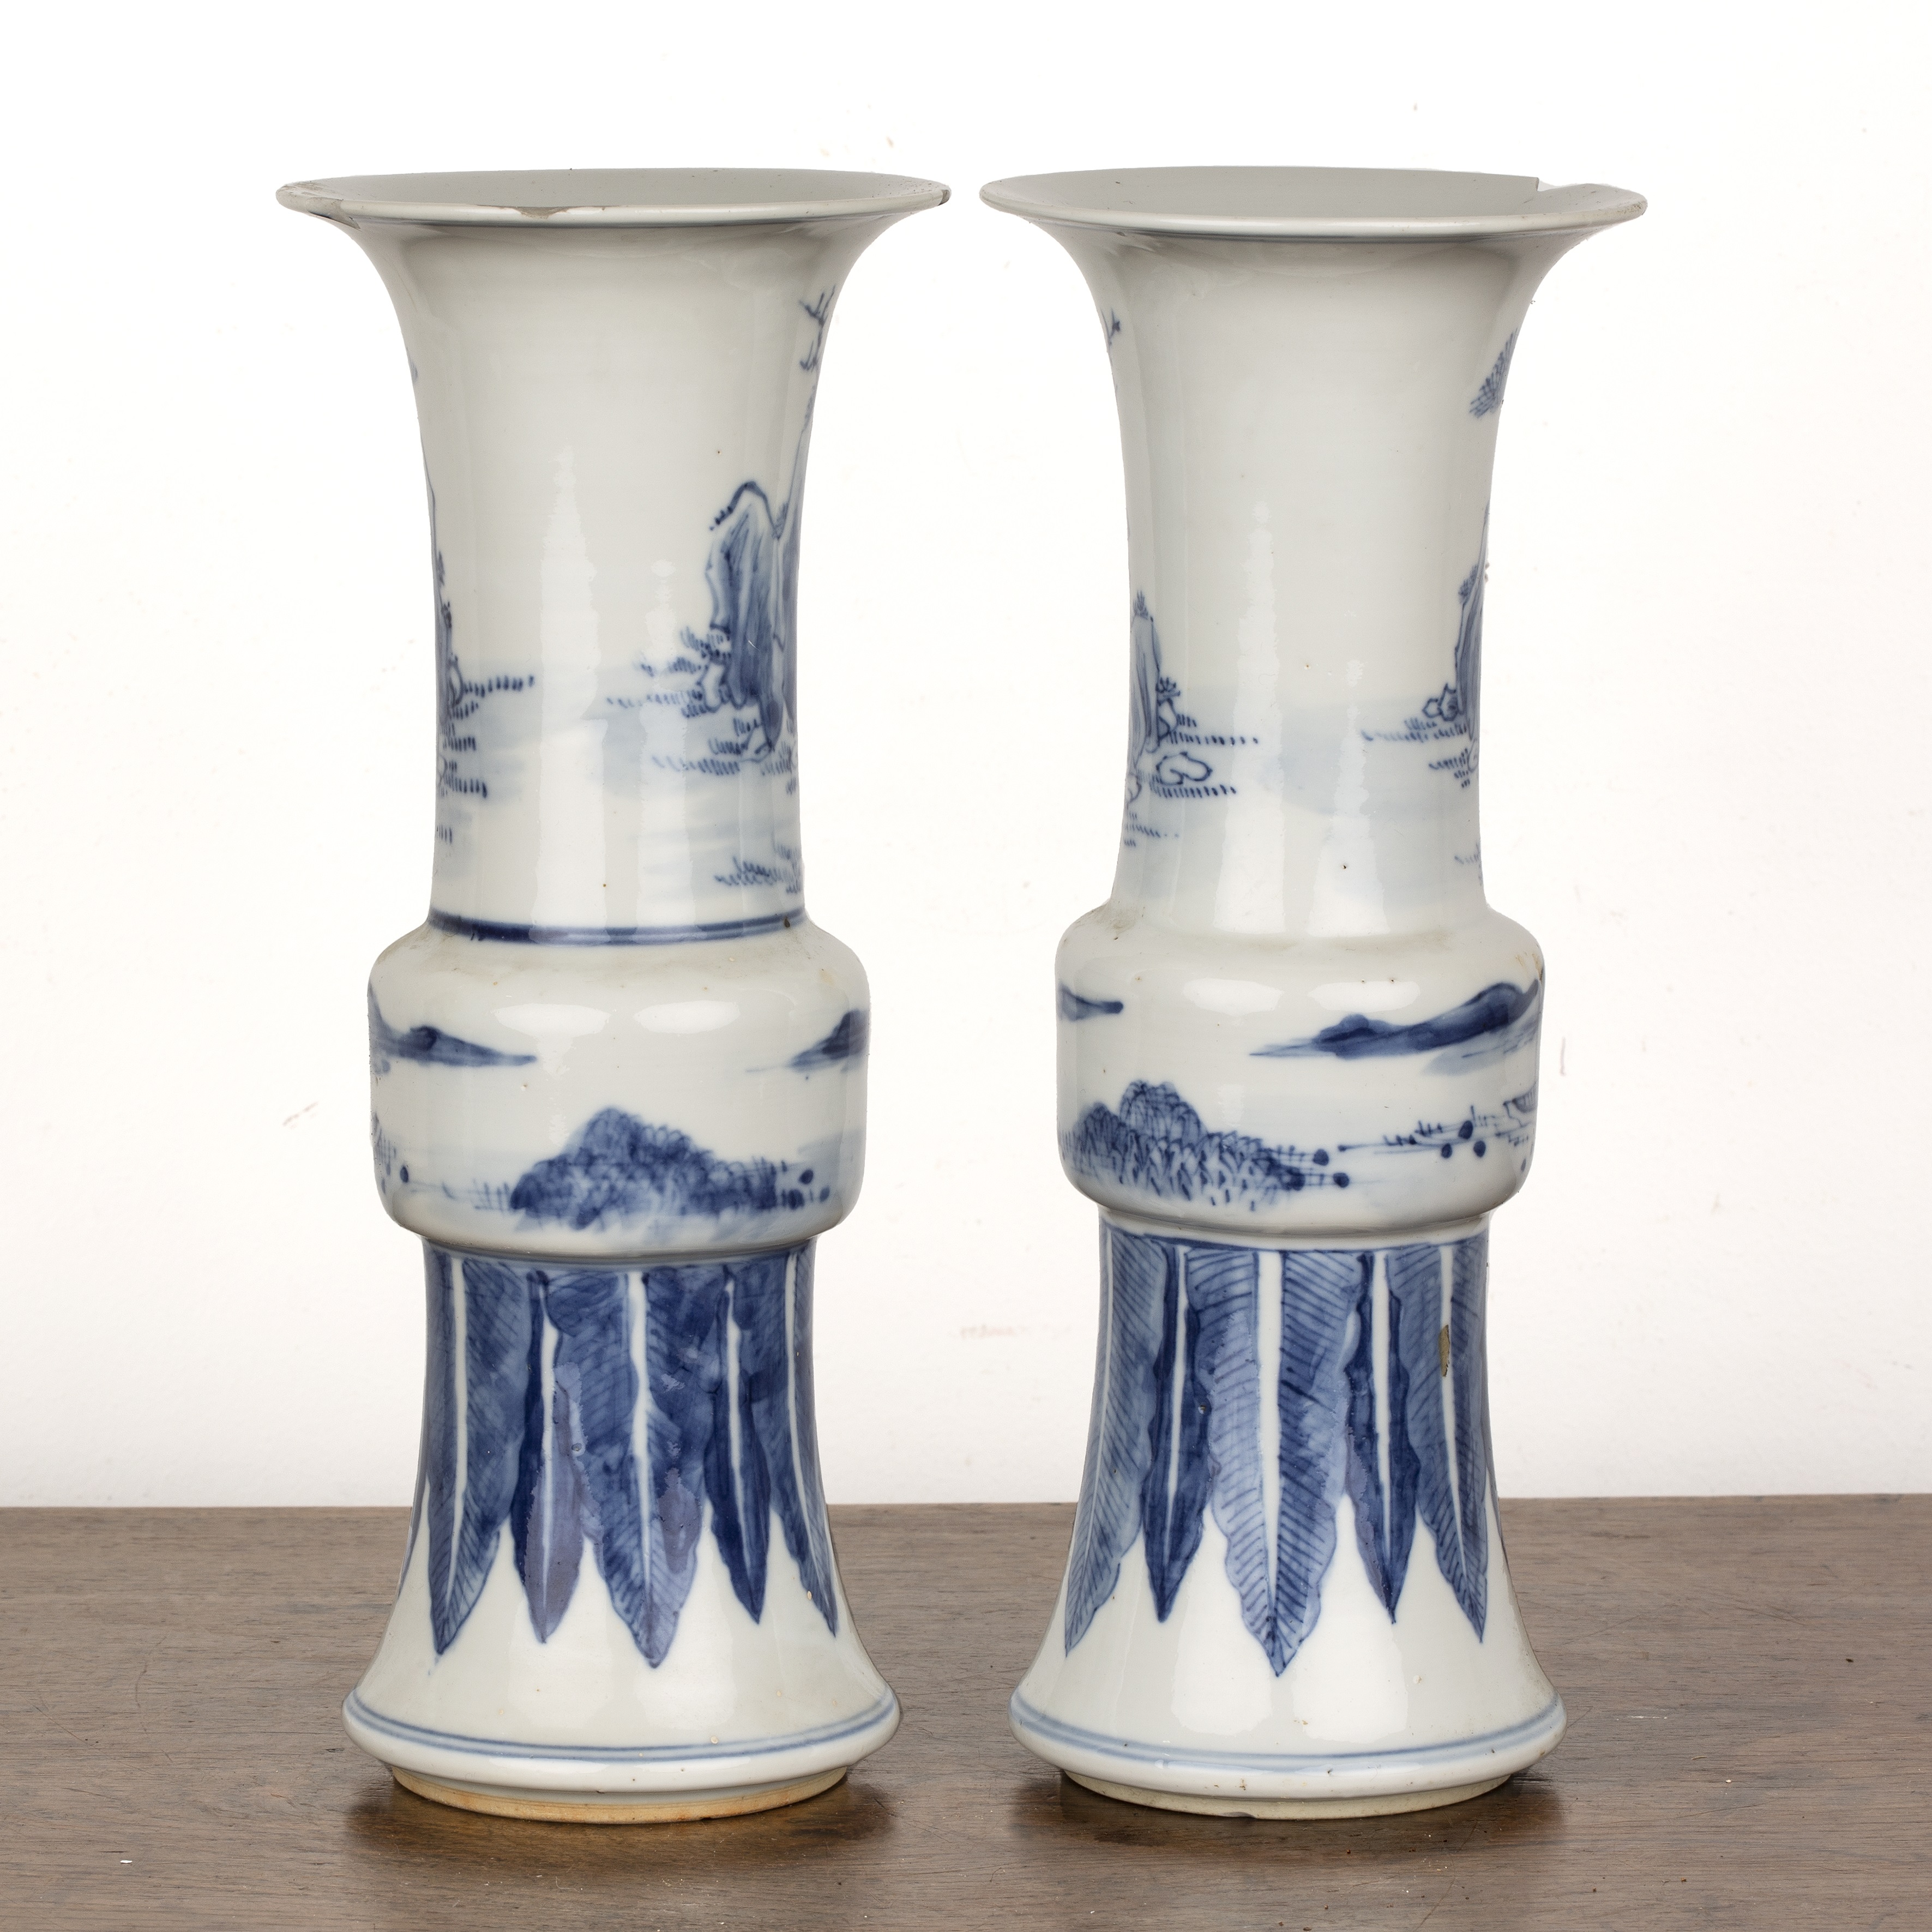 Pair of blue and white porcelain Gu vases Chinese, 19th Century painted with scholars, river - Image 2 of 5